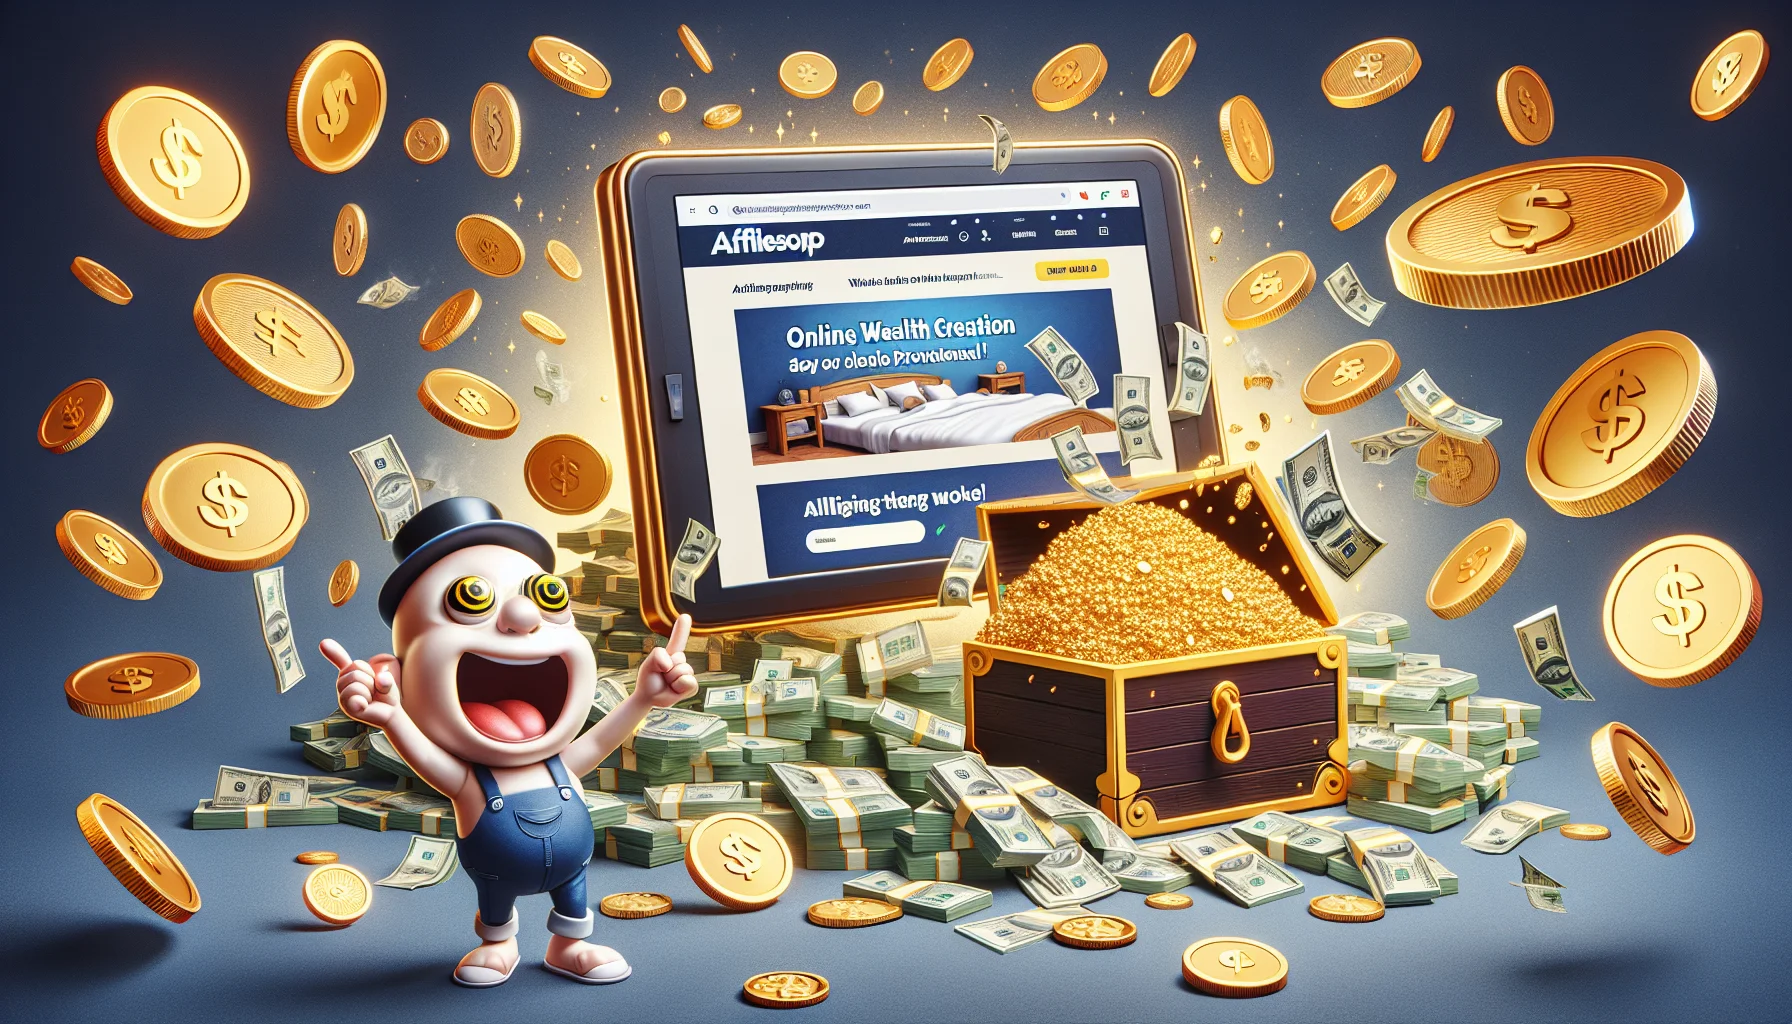 Imagine a humorous and compelling scene related to online wealth creation. It involves a digital screen floating in the air, displaying an engaging webpage that promotes an affiliate program for sleep products. The surrounding area is filled with symbols of prosperity like gleaming gold coins, stacks of dollar bills, and a treasure chest. Next to the floating screen stands a cartoon character with bulging eyes and an overexcited expression, pointing at it while holding bundles of cash in its other hand, implying the lucrative opportunities such affiliate programs offer.